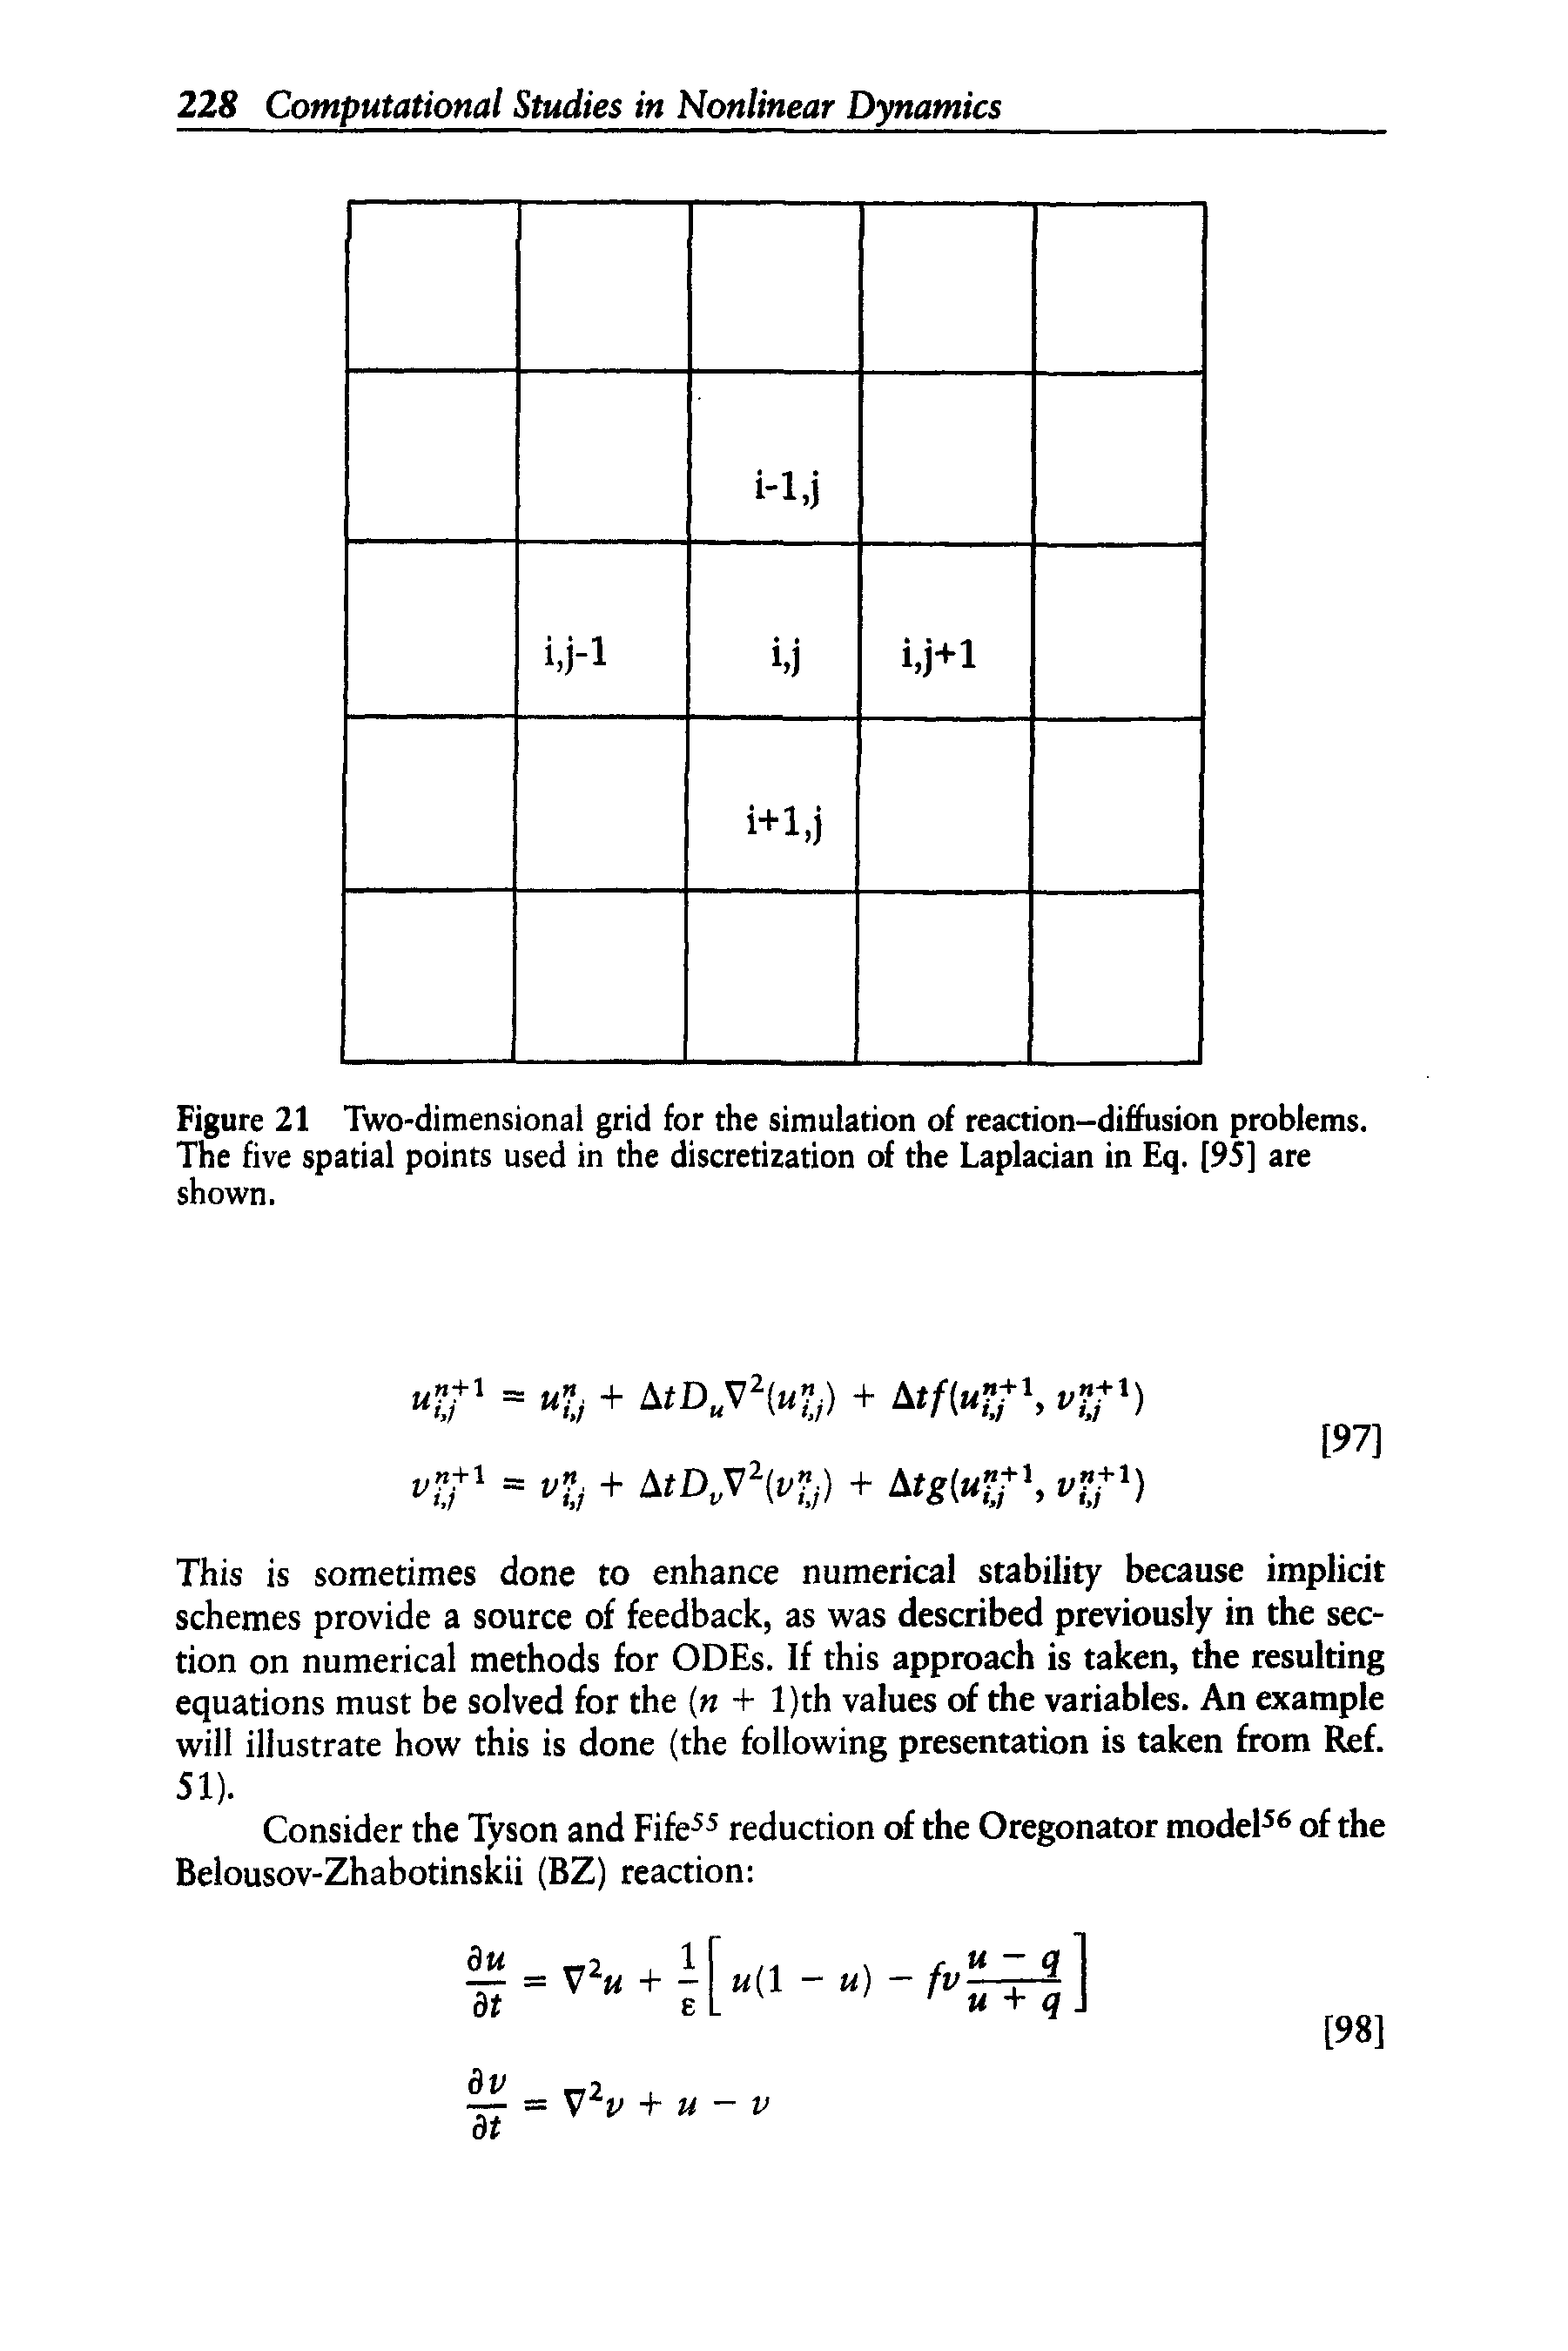 Figure 21 Two-dimensional grid for the simulation of reaction-diffusion problems. The five spatial points used in the discretization of the Lapladan in Eq. [95] are shown.